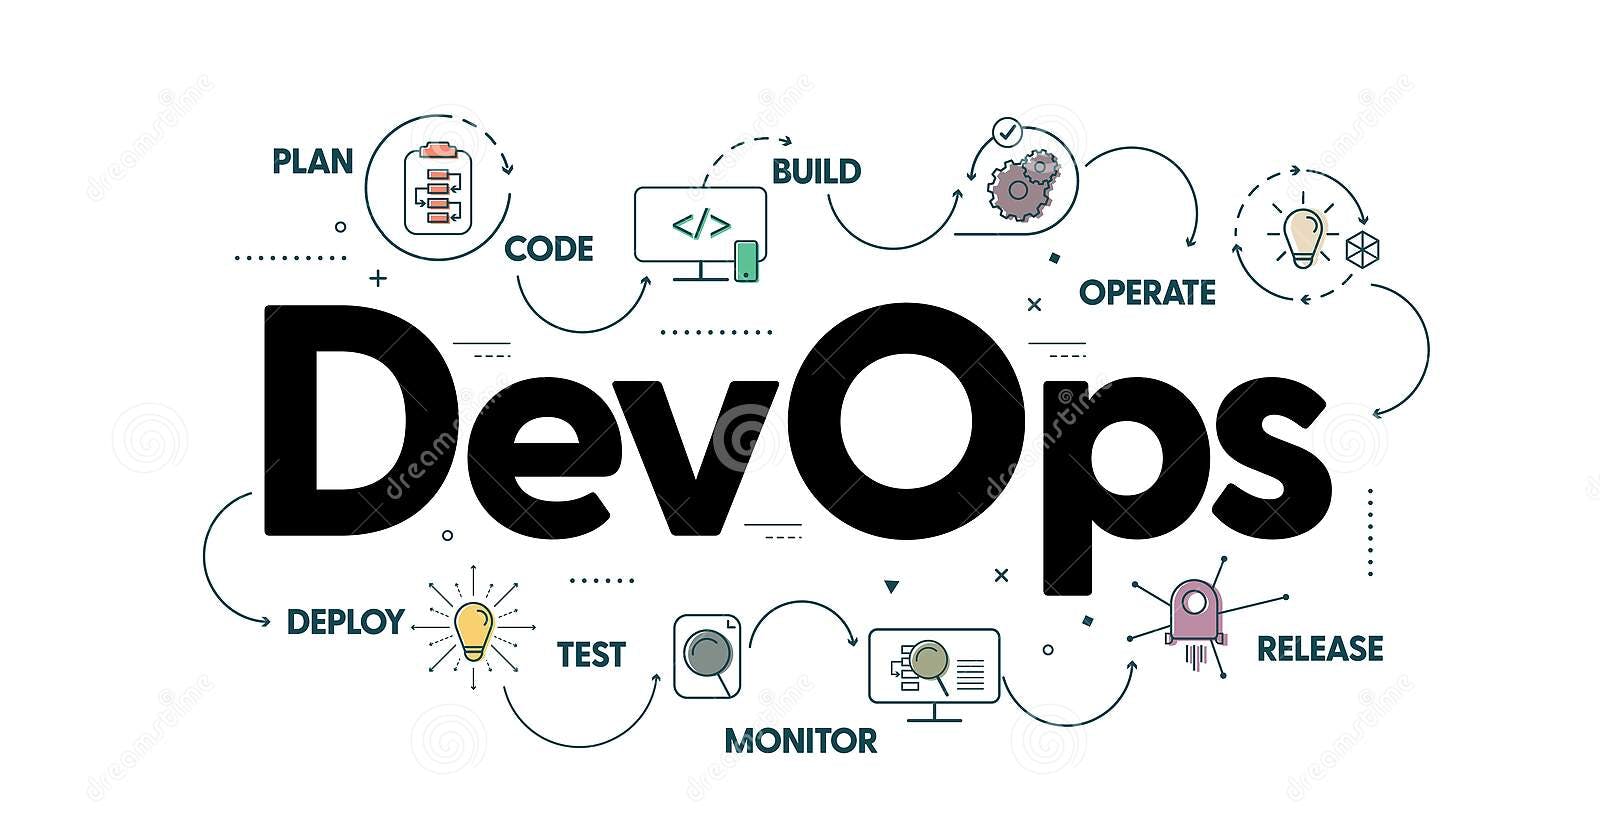 My Journey to the World of DevOps